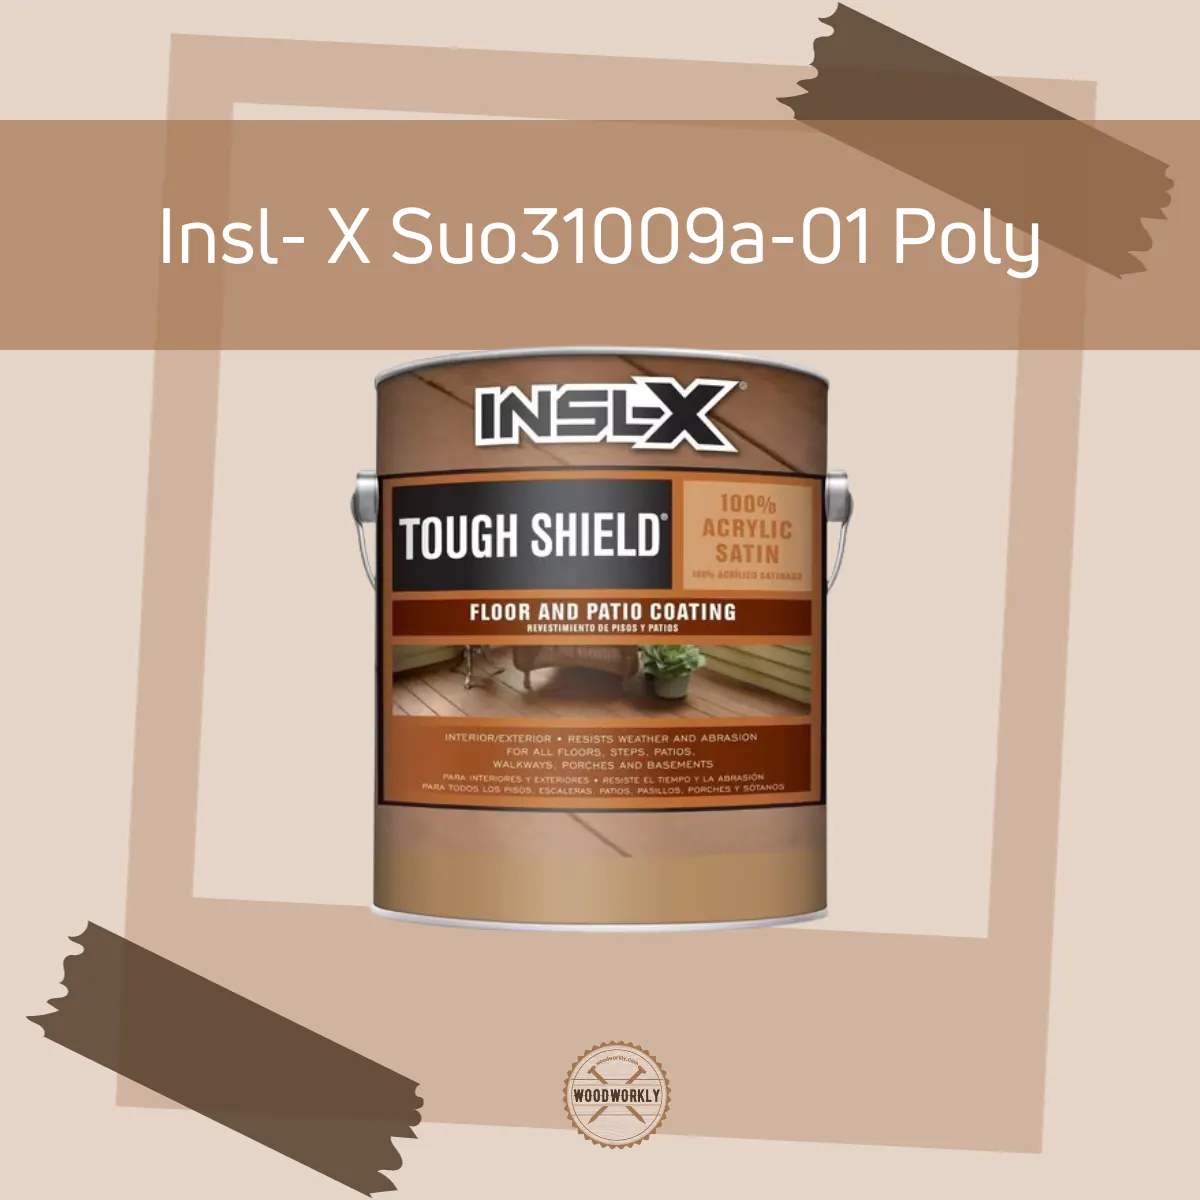 Insl- X Suo31009a-01 Poly